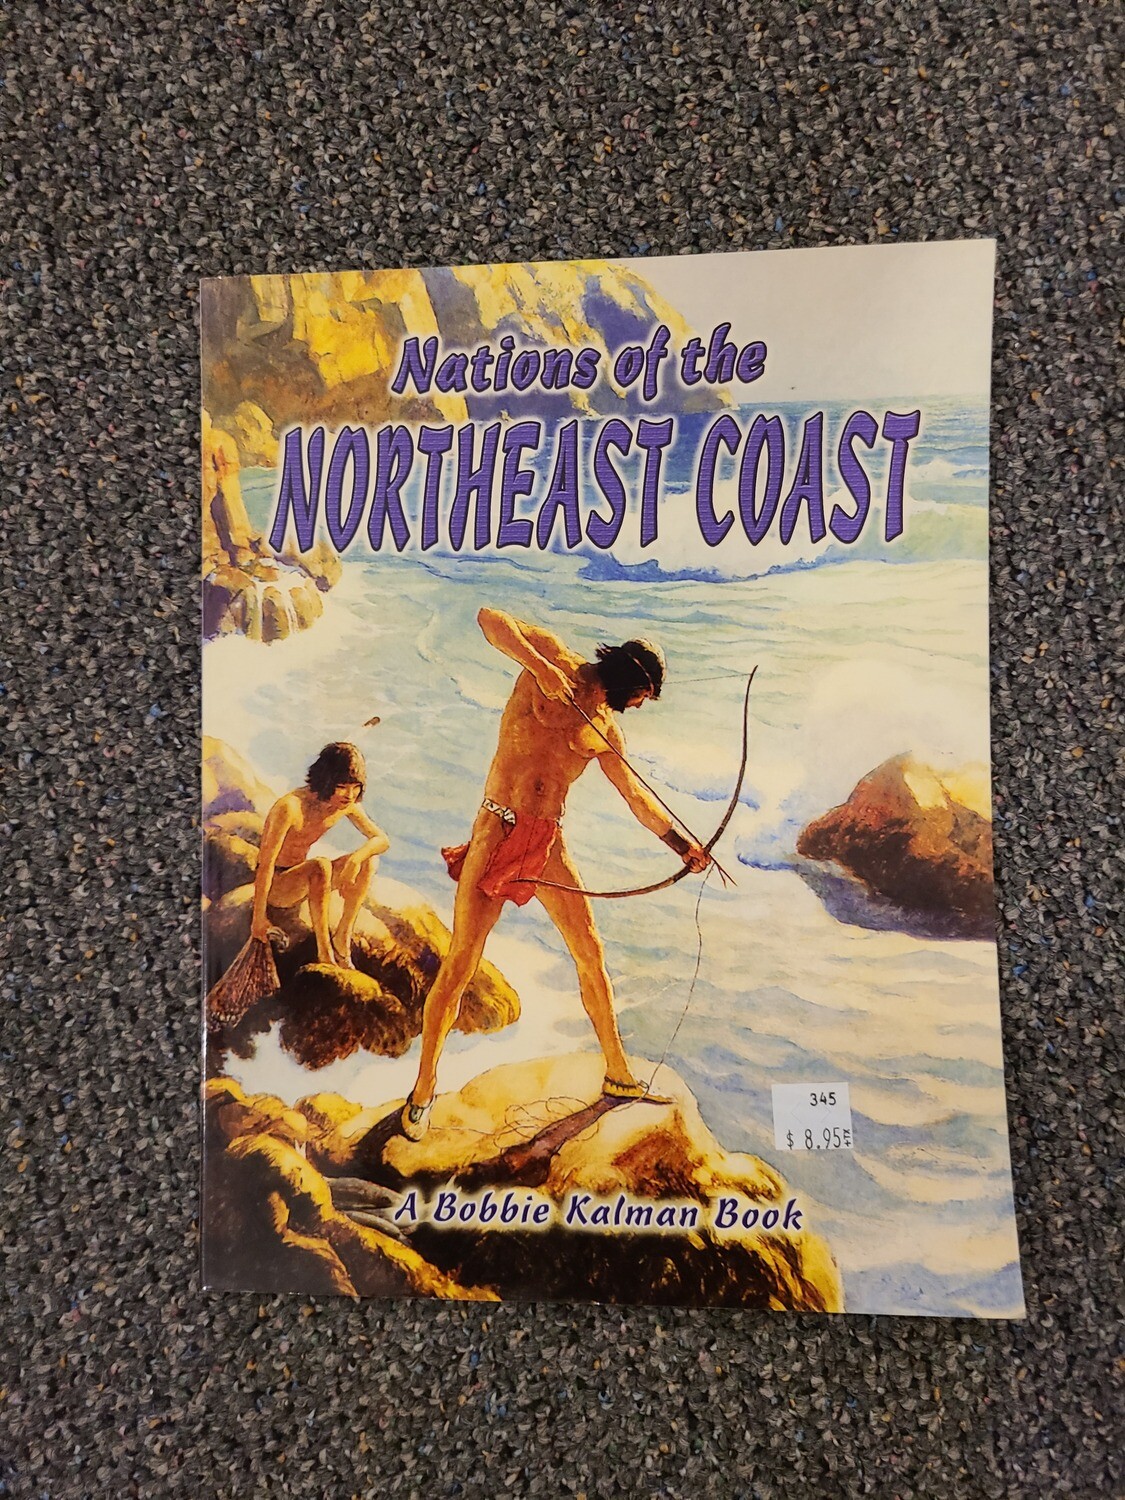 Nations of the Northeast Coast